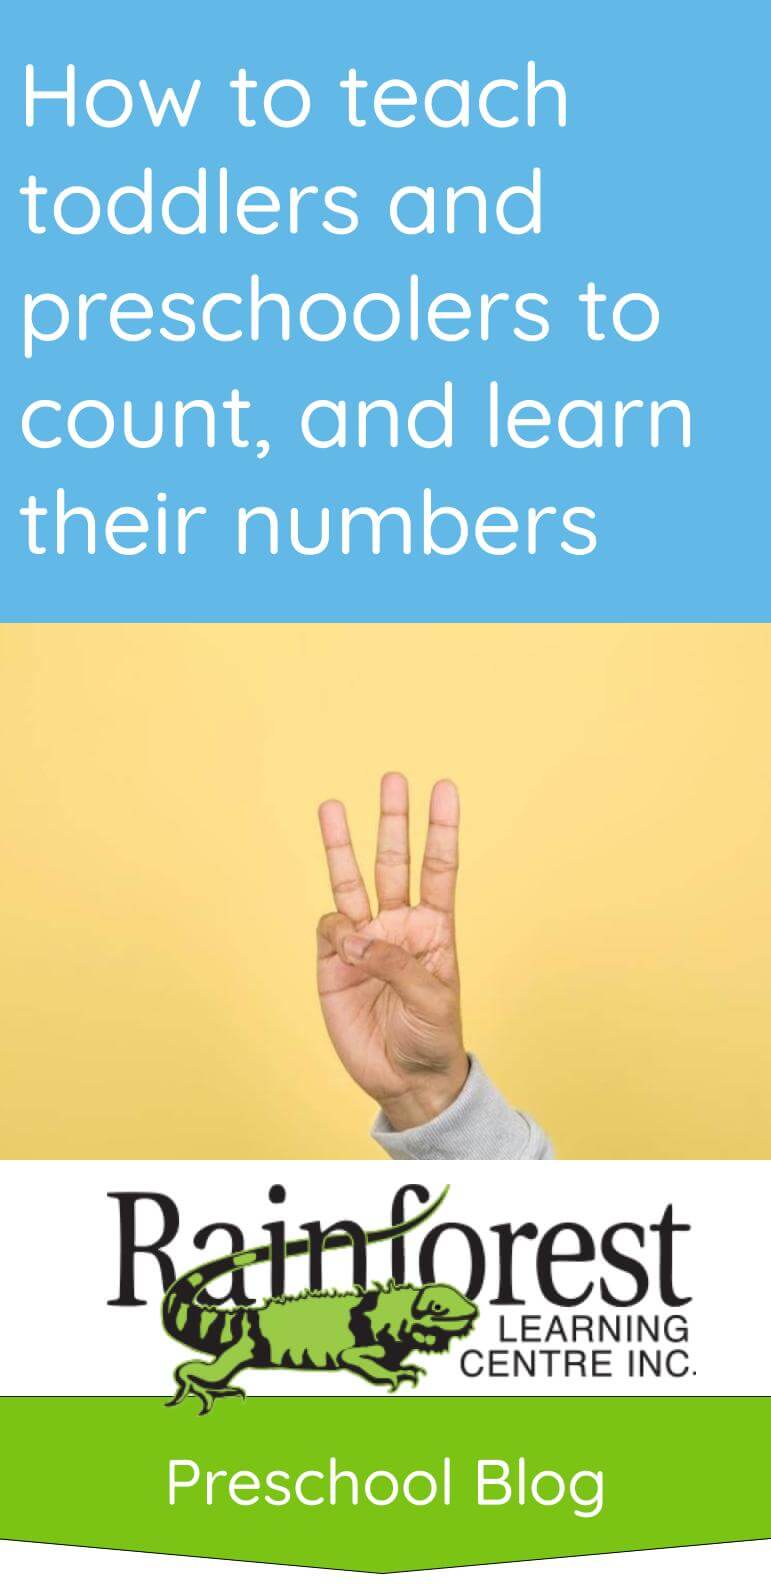 Teach toddlers and preschoolers to count and learn their numbers - article Pinterest image